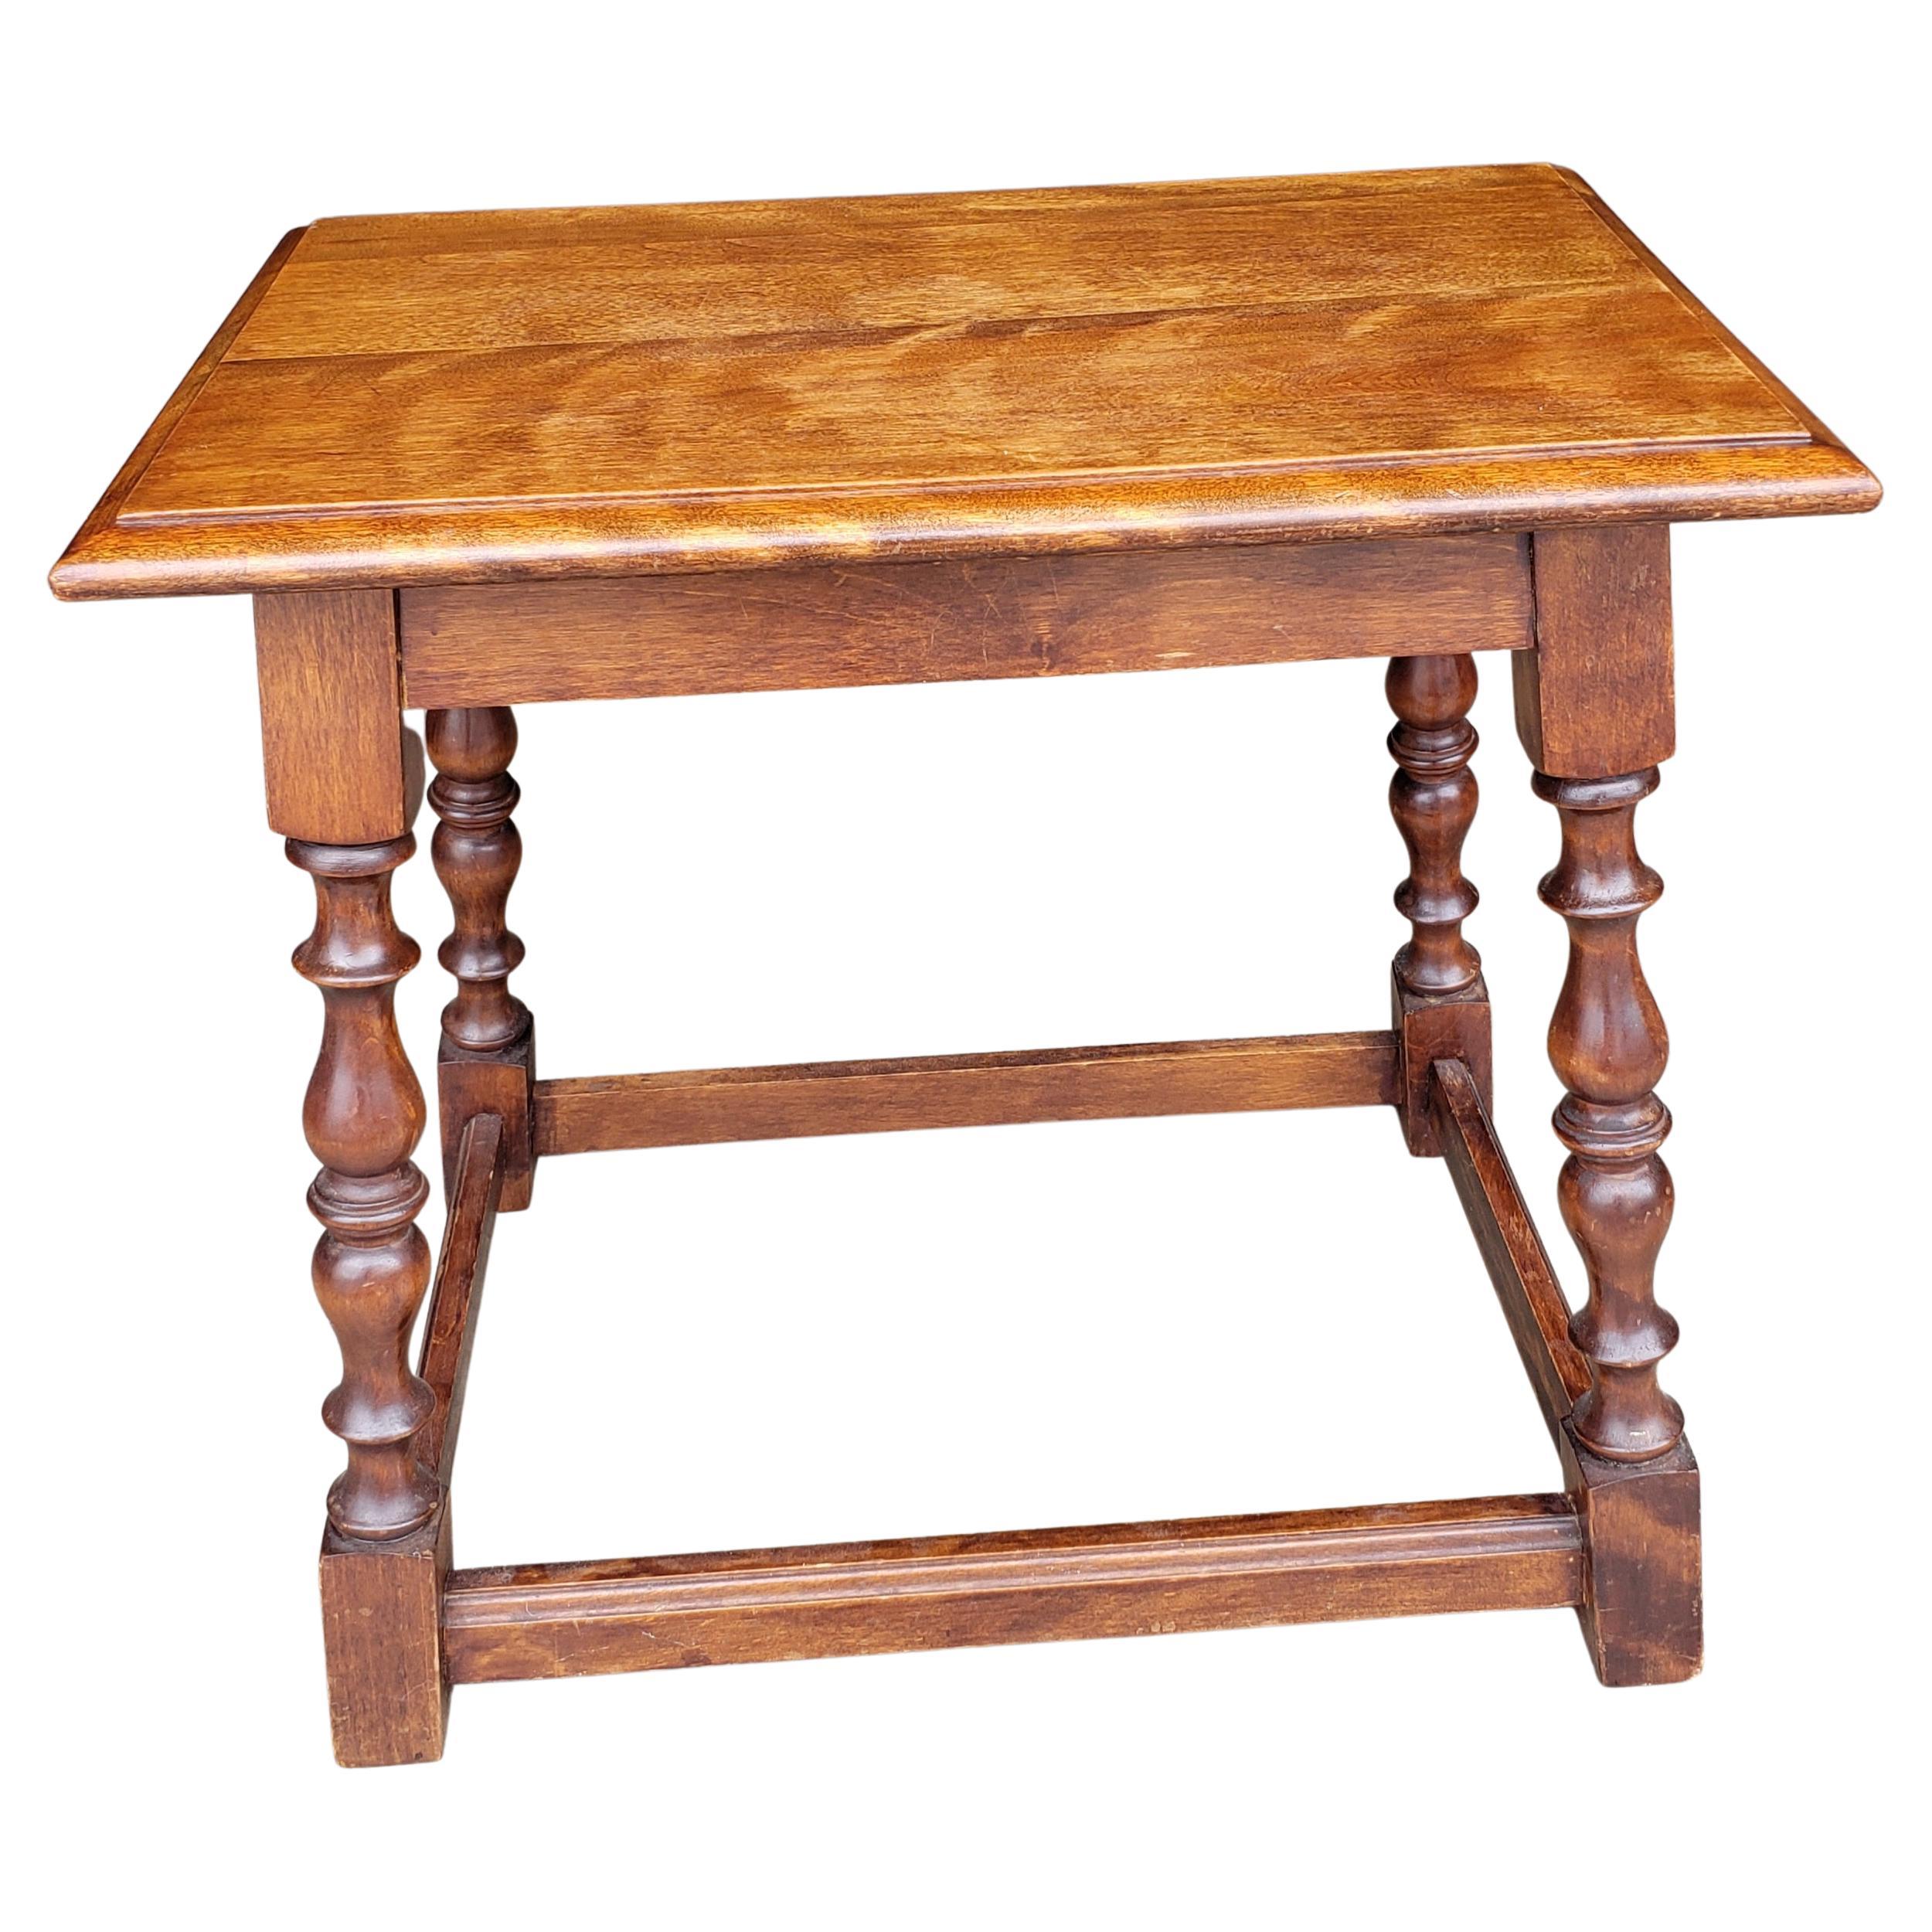 Amish crafted English joint solid mahogany bench / stool in excellent condition.
Measures 20